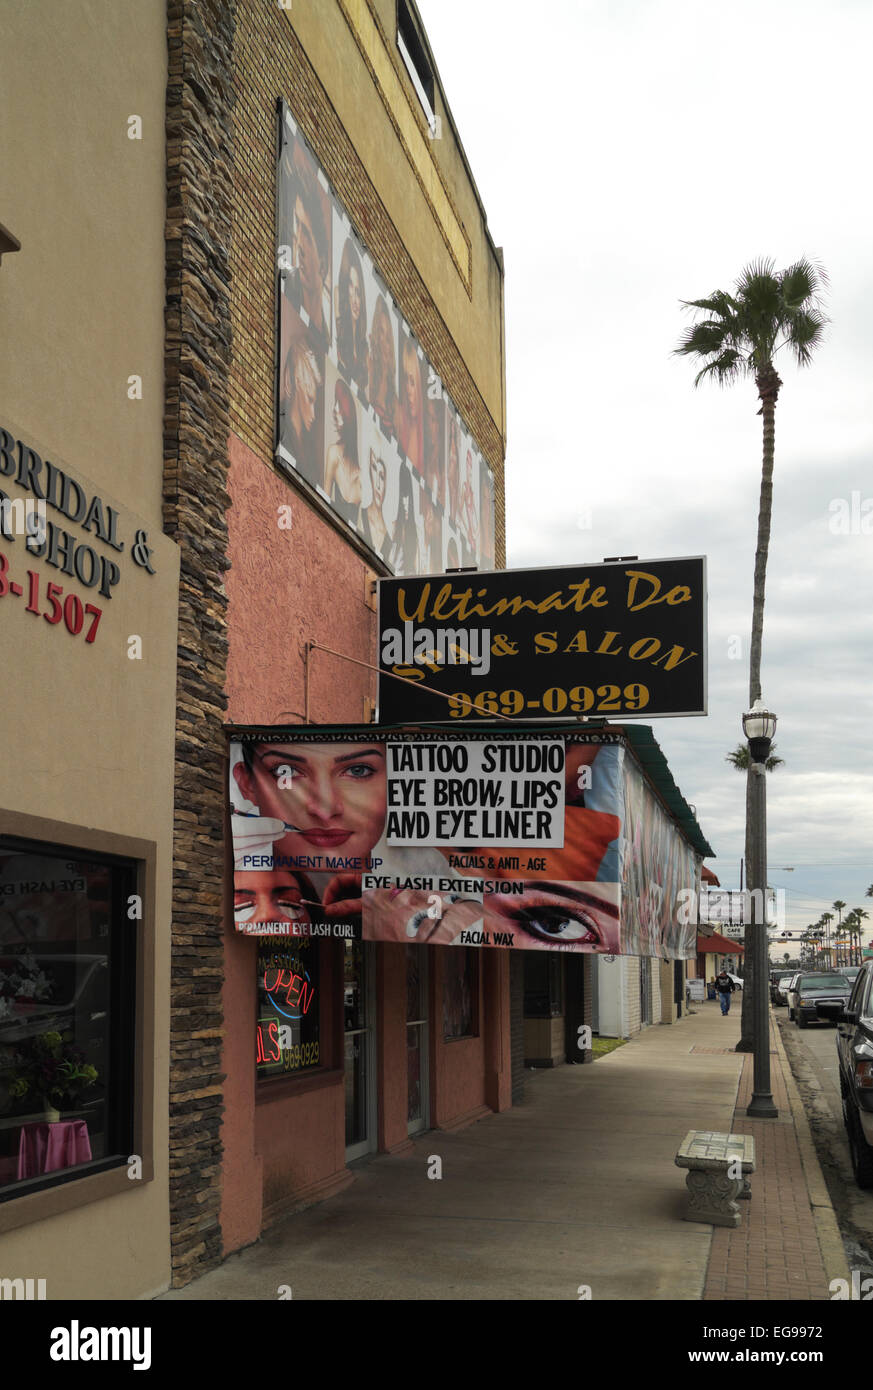 Ultimate Do Spa and Salon in downtown Weslaco, Texas, USA. Stock Photo